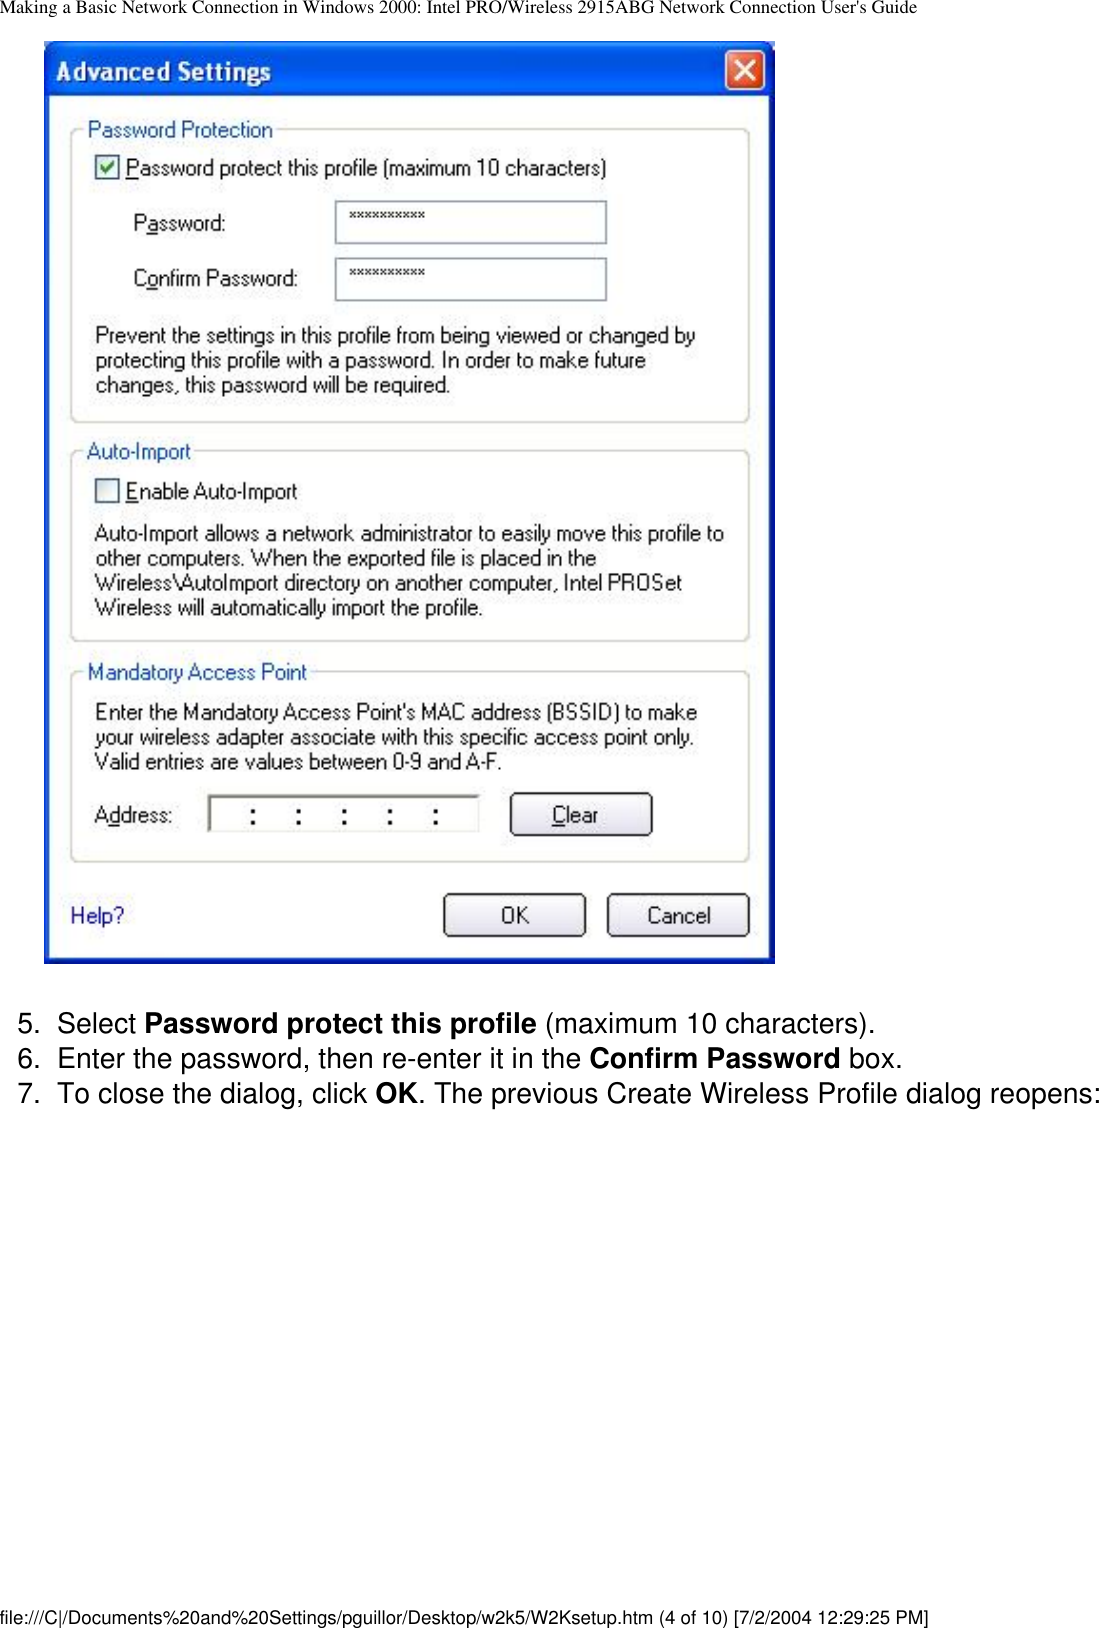 Making a Basic Network Connection in Windows 2000: Intel PRO/Wireless 2915ABG Network Connection User&apos;s Guide        5.  Select Password protect this profile (maximum 10 characters).6.  Enter the password, then re-enter it in the Confirm Password box. 7.  To close the dialog, click OK. The previous Create Wireless Profile dialog reopens:file:///C|/Documents%20and%20Settings/pguillor/Desktop/w2k5/W2Ksetup.htm (4 of 10) [7/2/2004 12:29:25 PM]